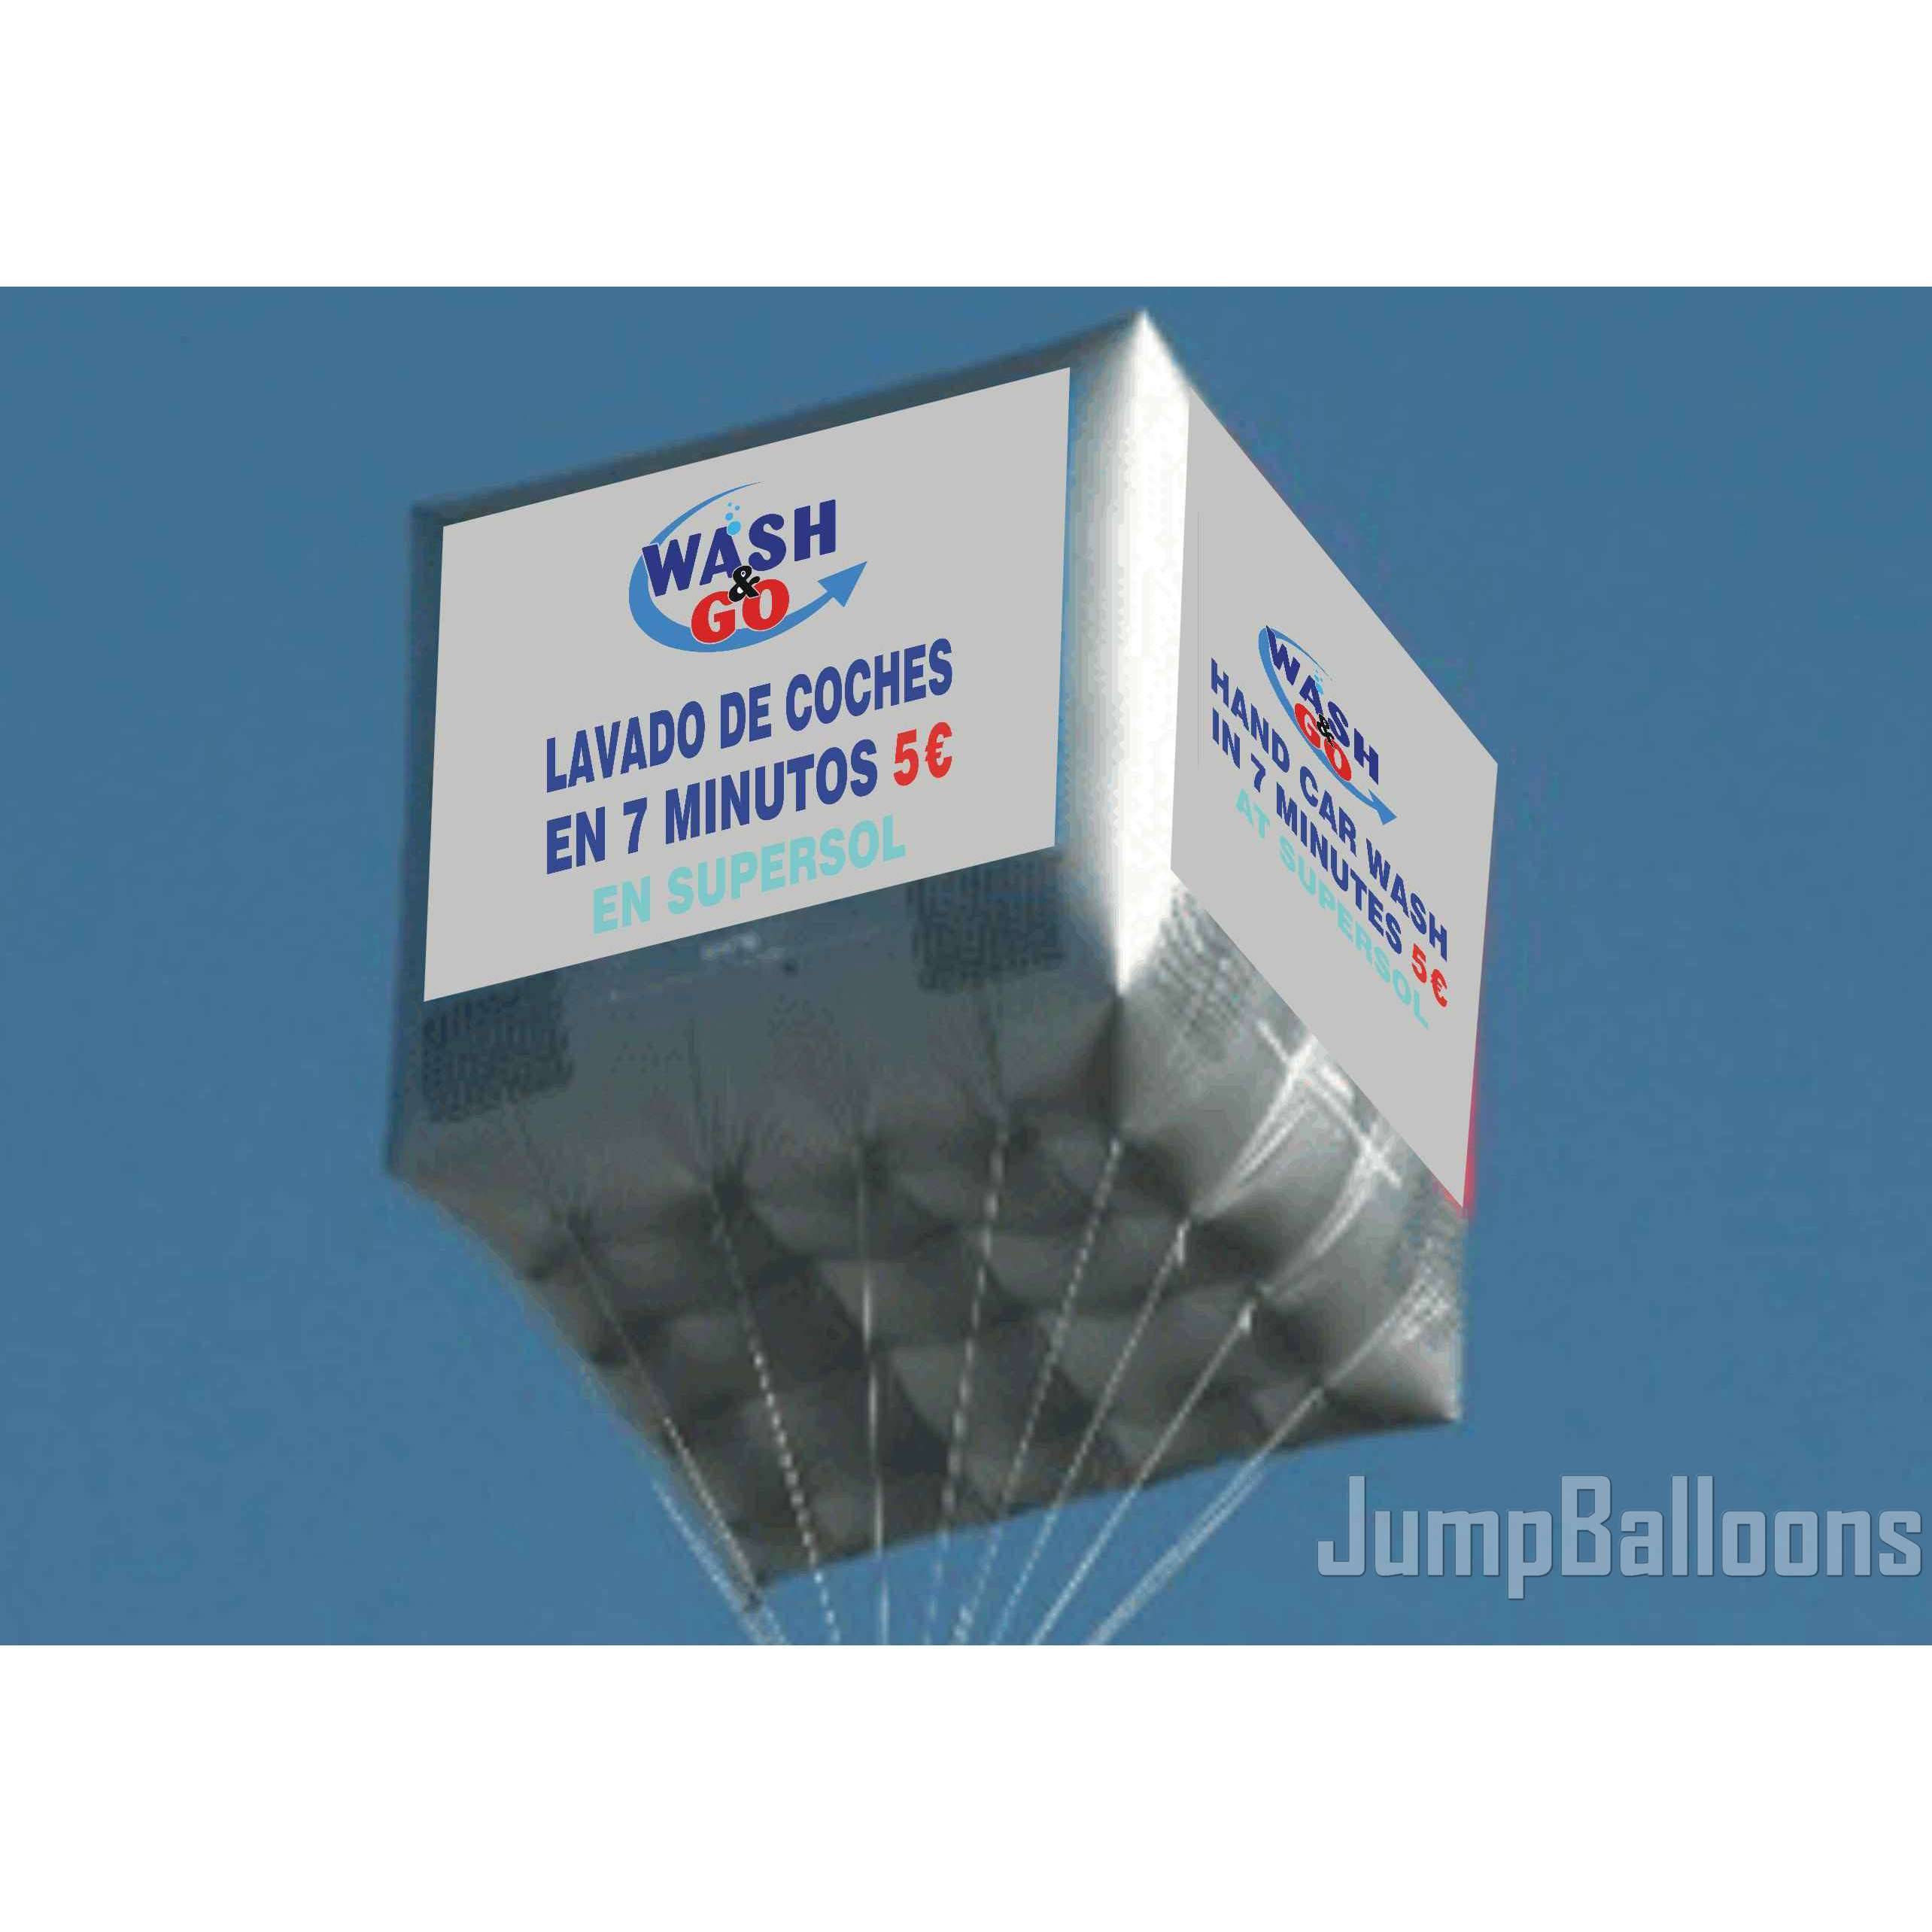 Helium Balloons, Advertising Inflatables, Cube Balloon B2020 